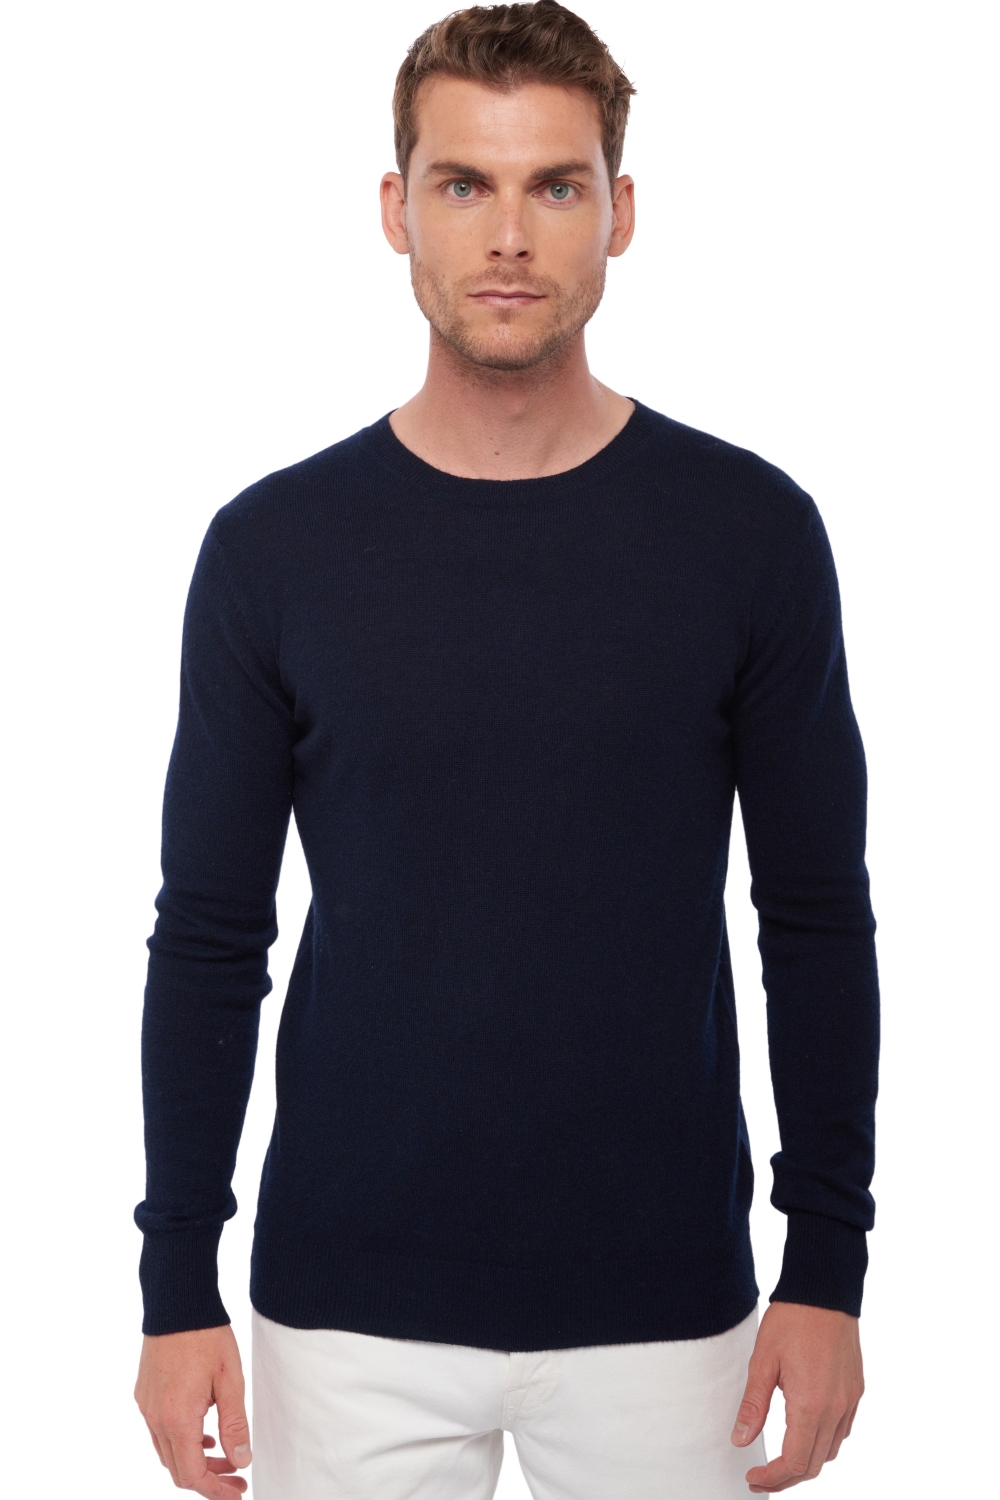 Cashmere men basic sweaters at low prices tao first dress blue m